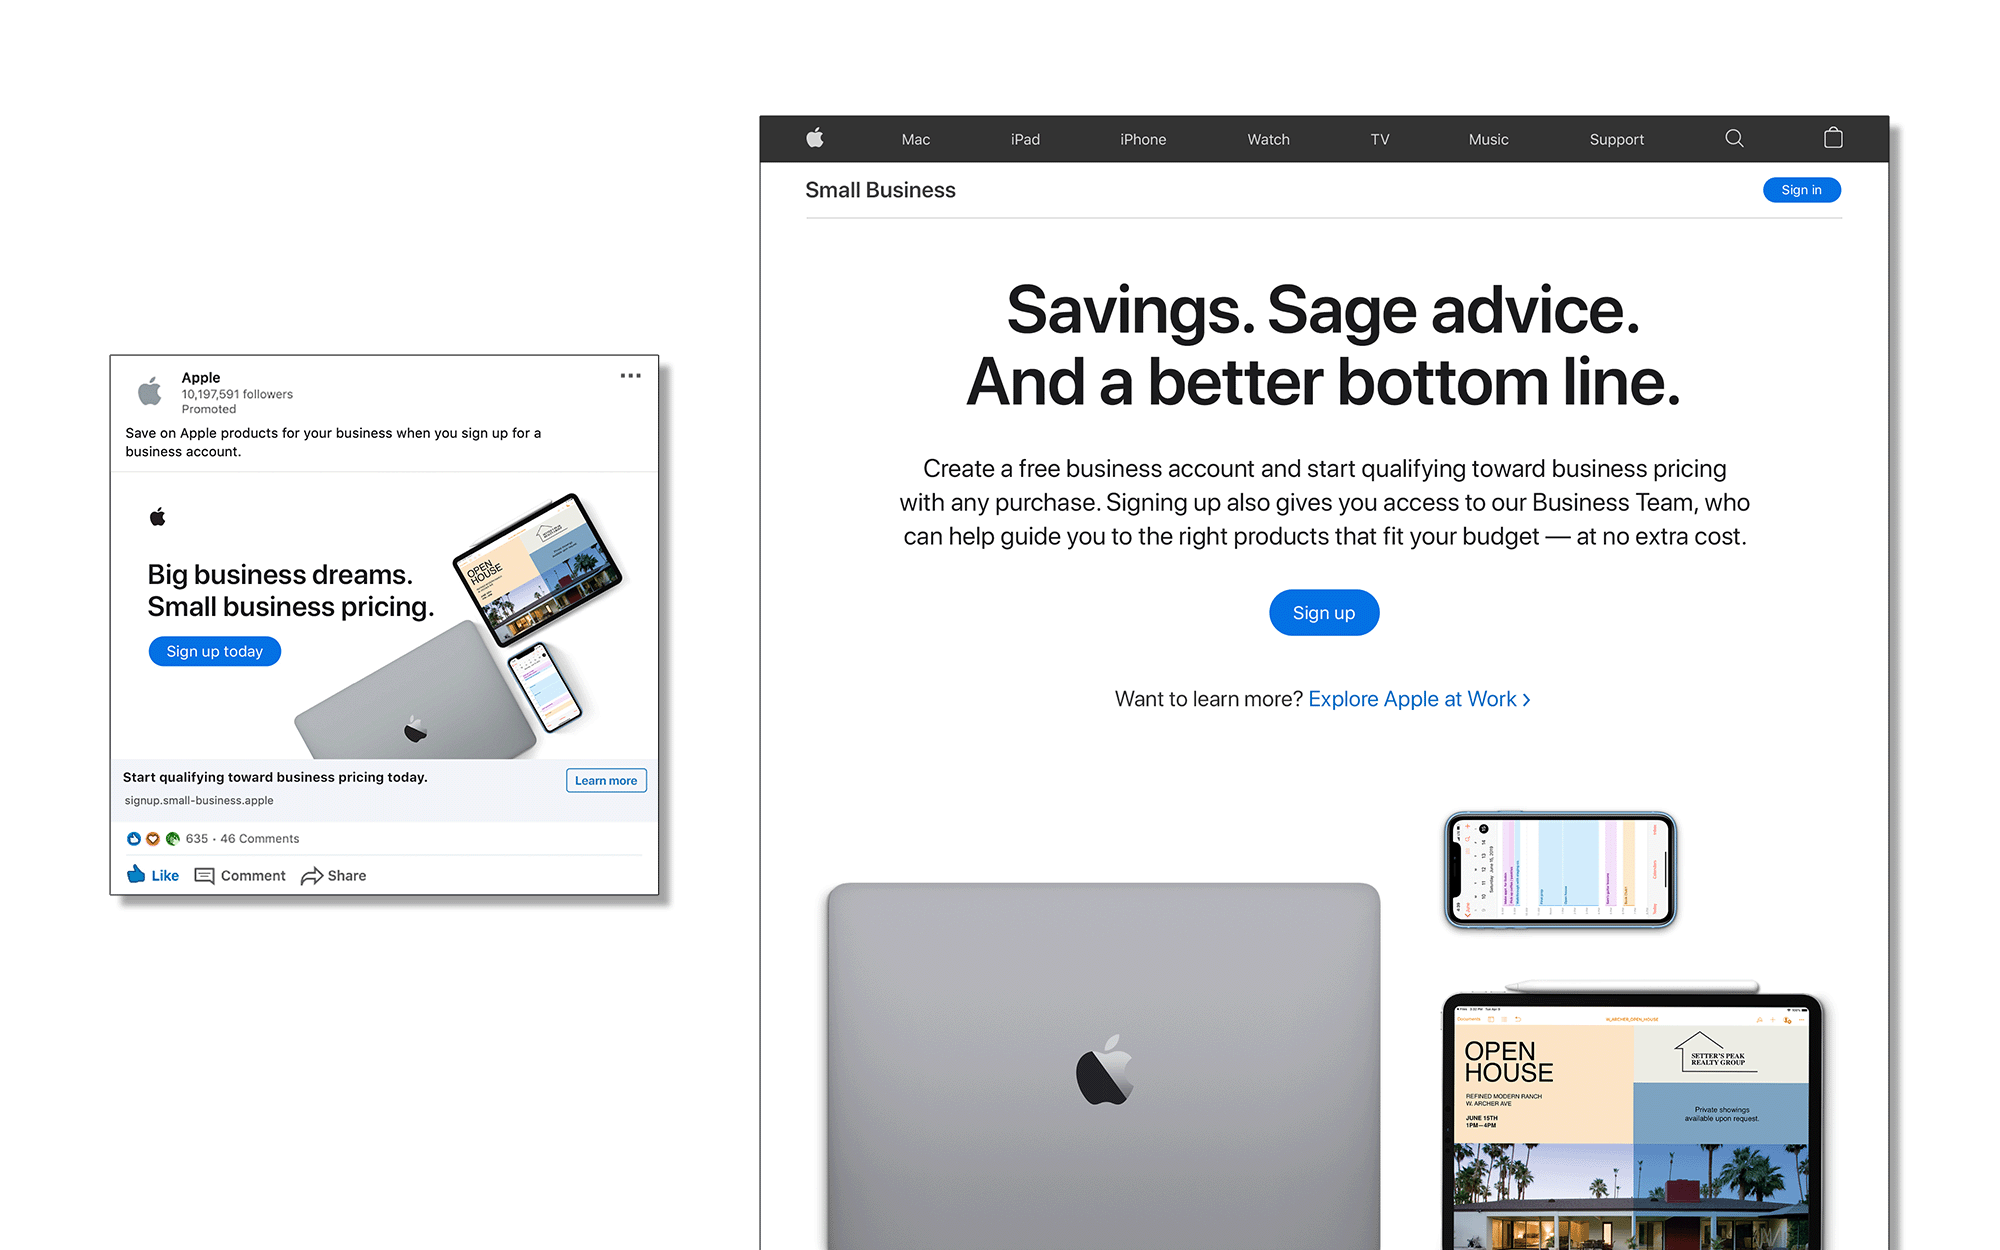 Apple - Small Business LinkedIN posts and Landing Page